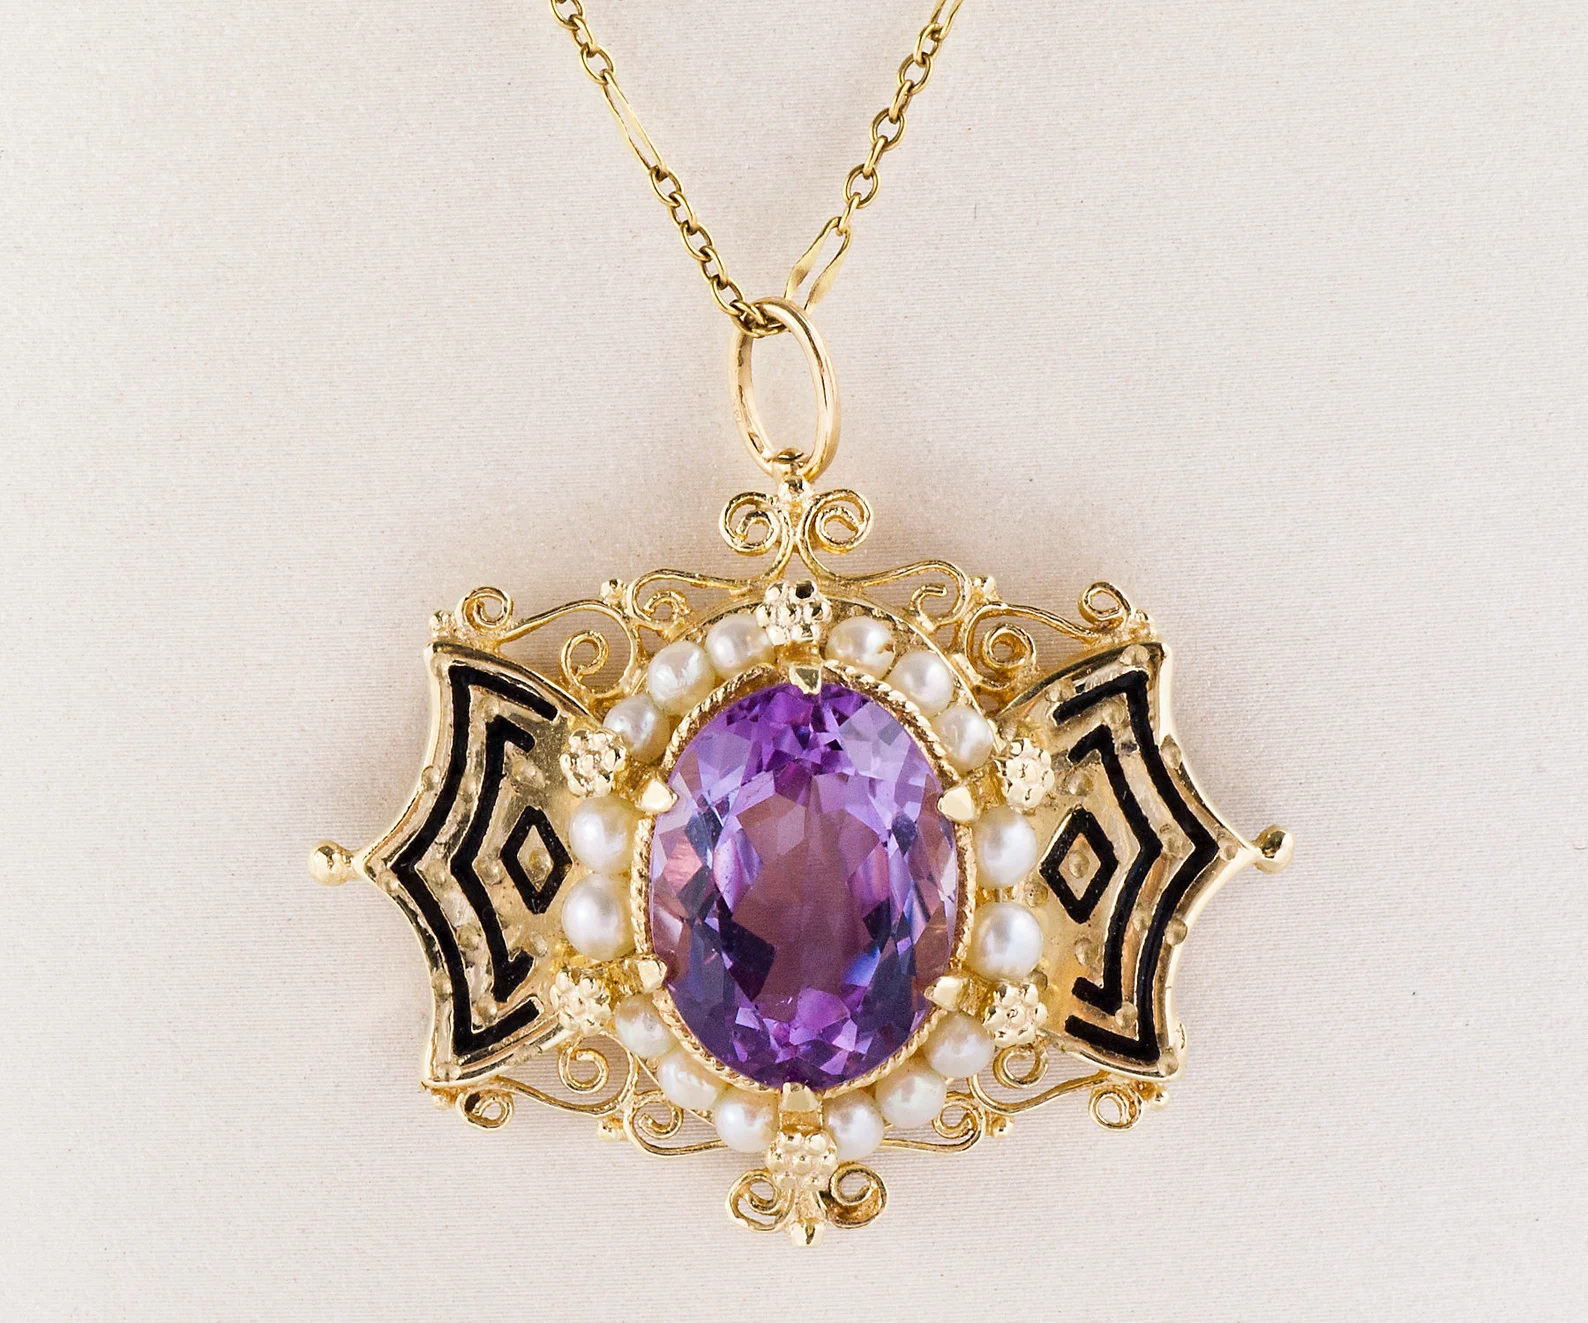 Vintage 14k Yellow Gold Amethyst and Pearl Pendant